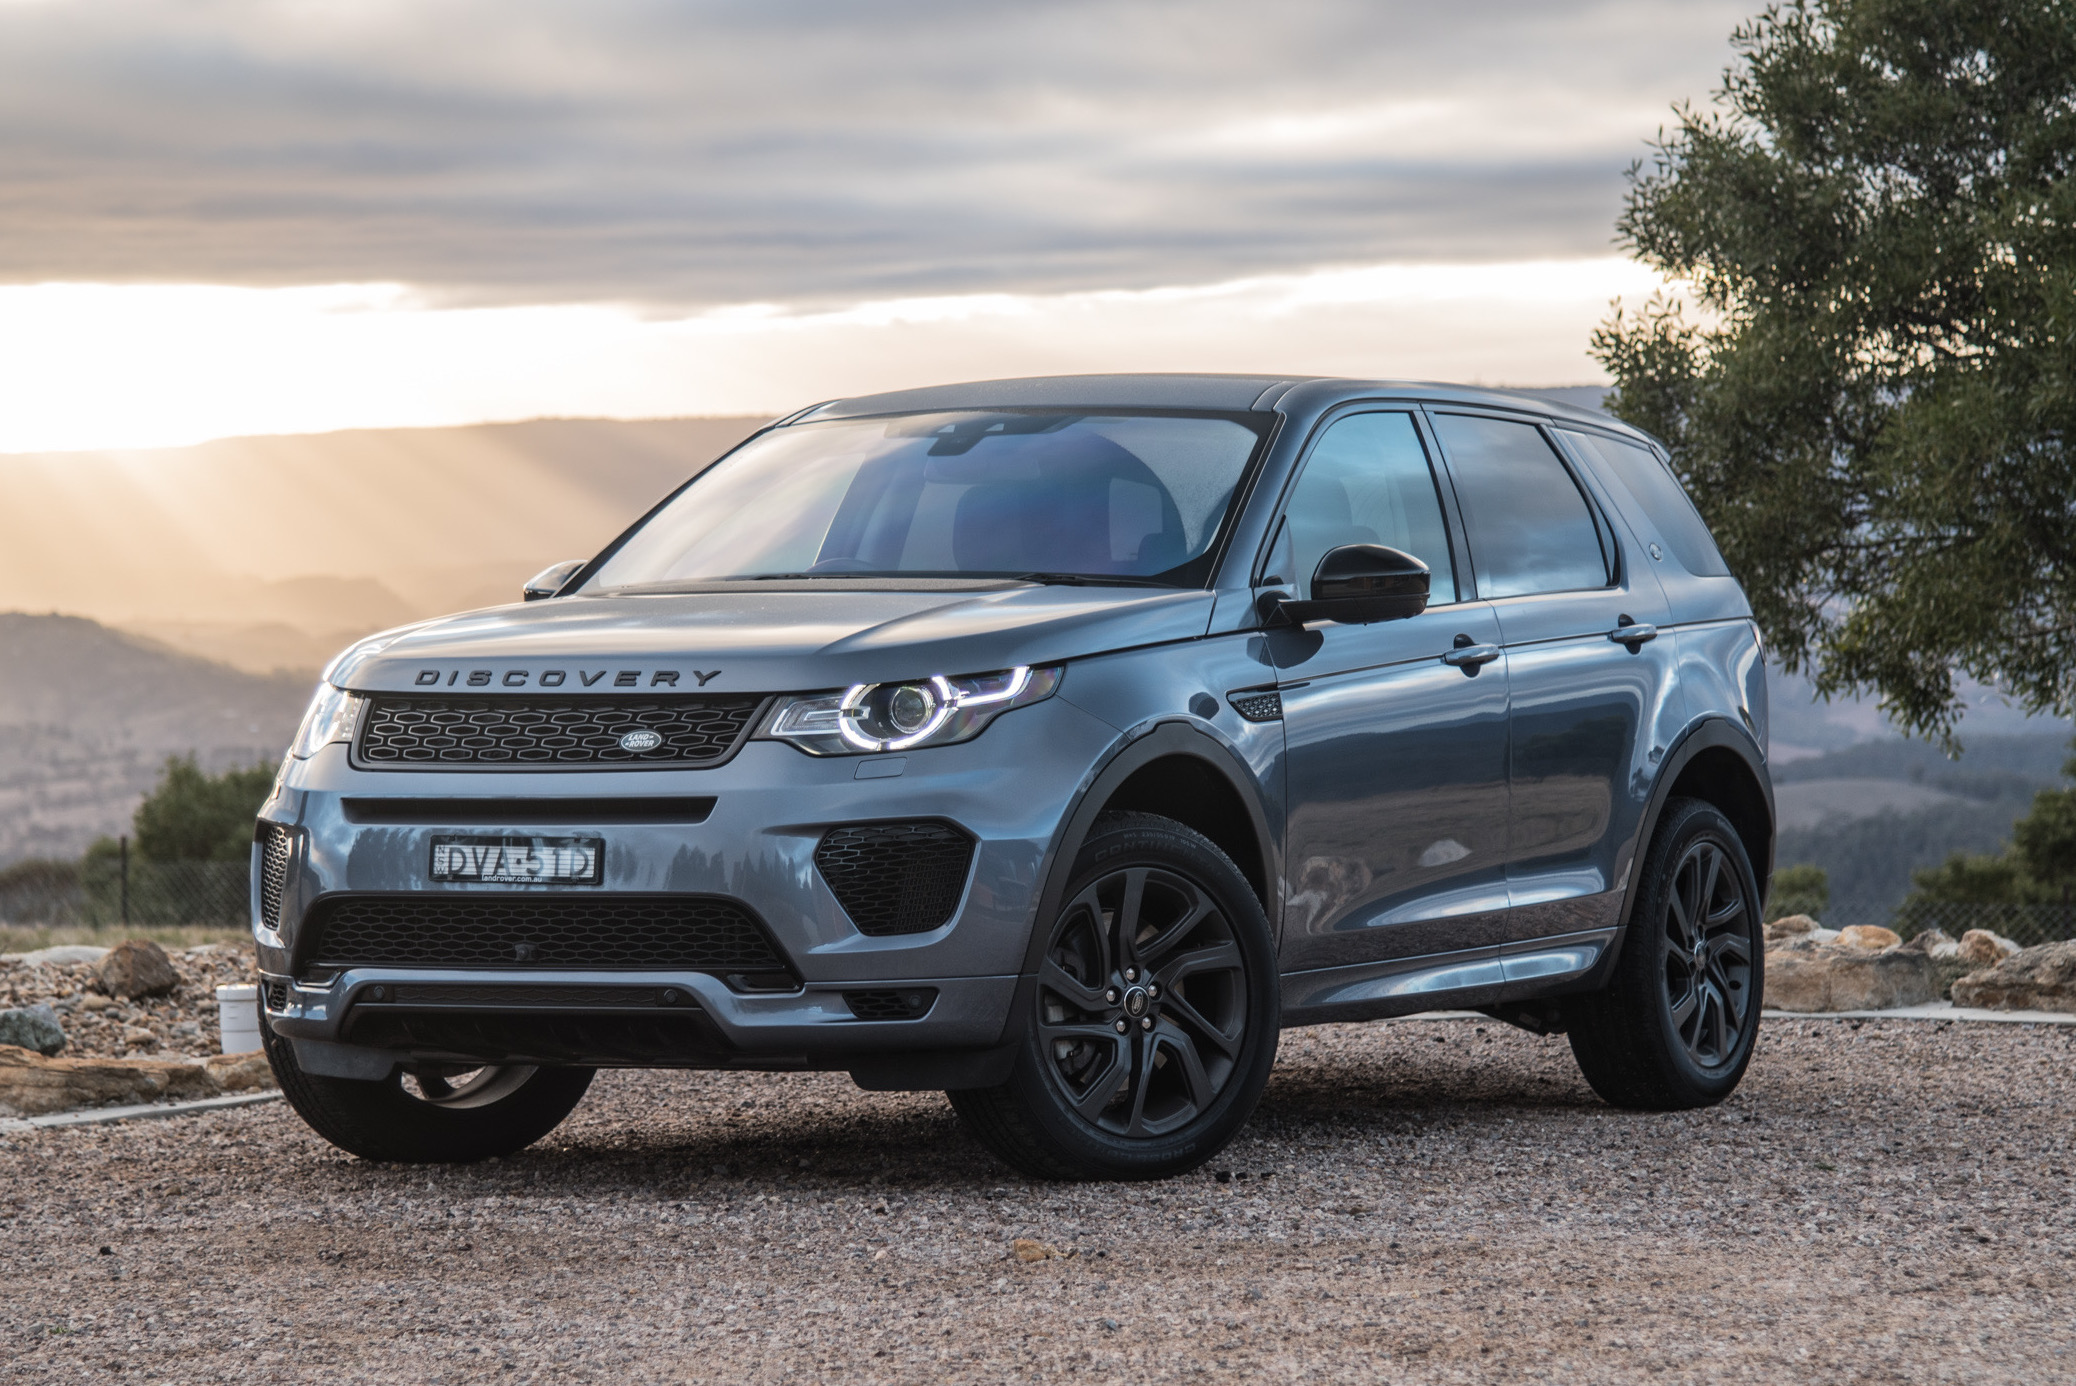 2018 Land Rover Discovery Sport Si4 SE review (video)